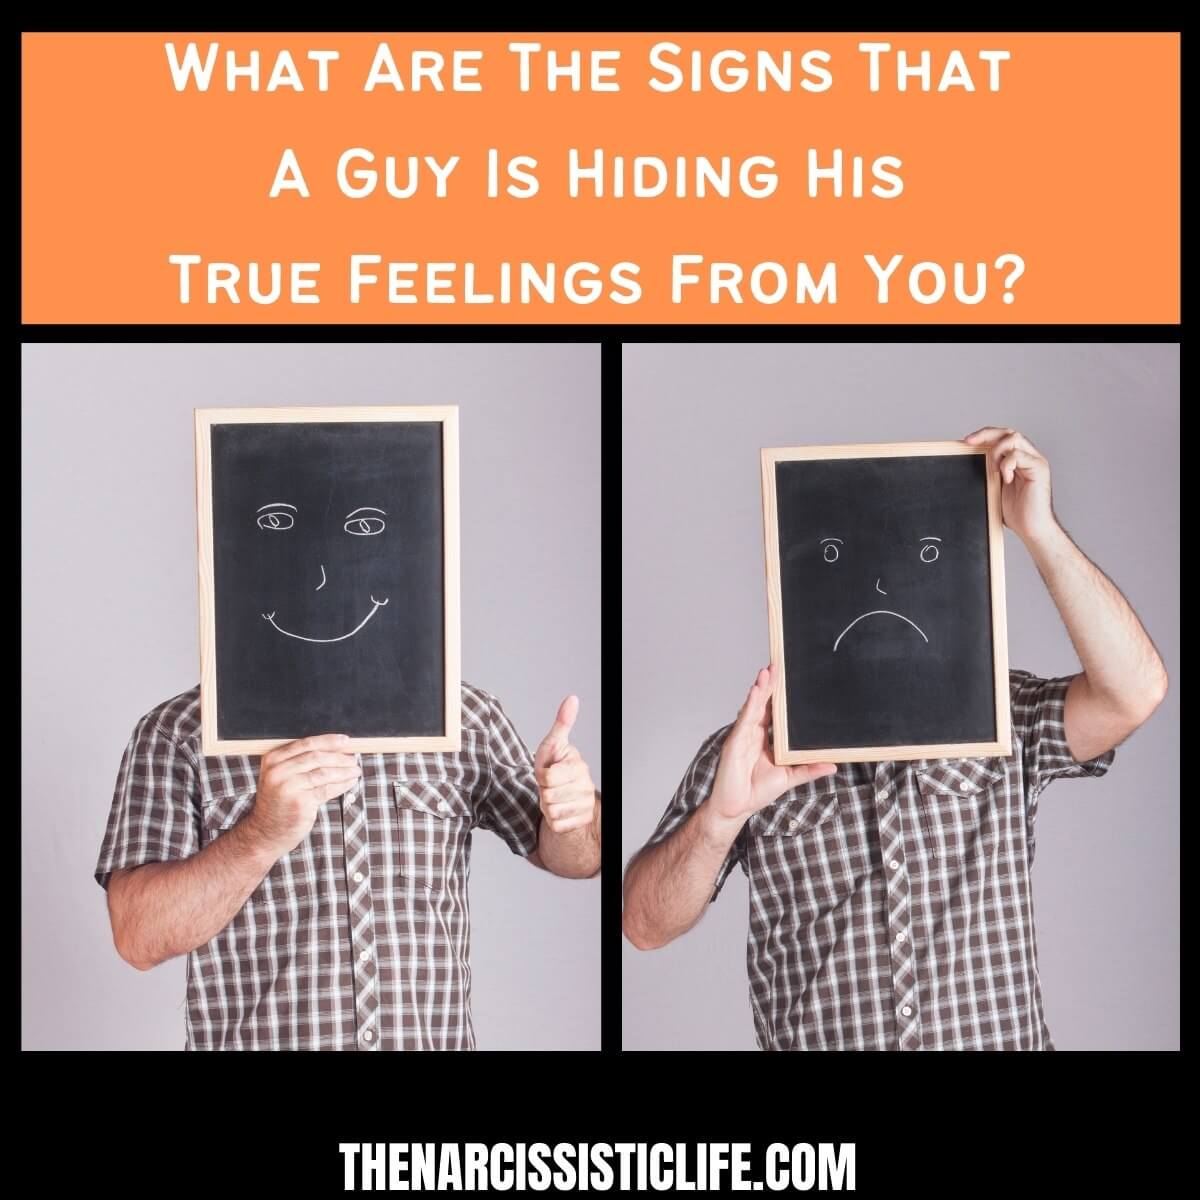 What Are The Signs That A Guy Is Hiding His True Feelings From You?